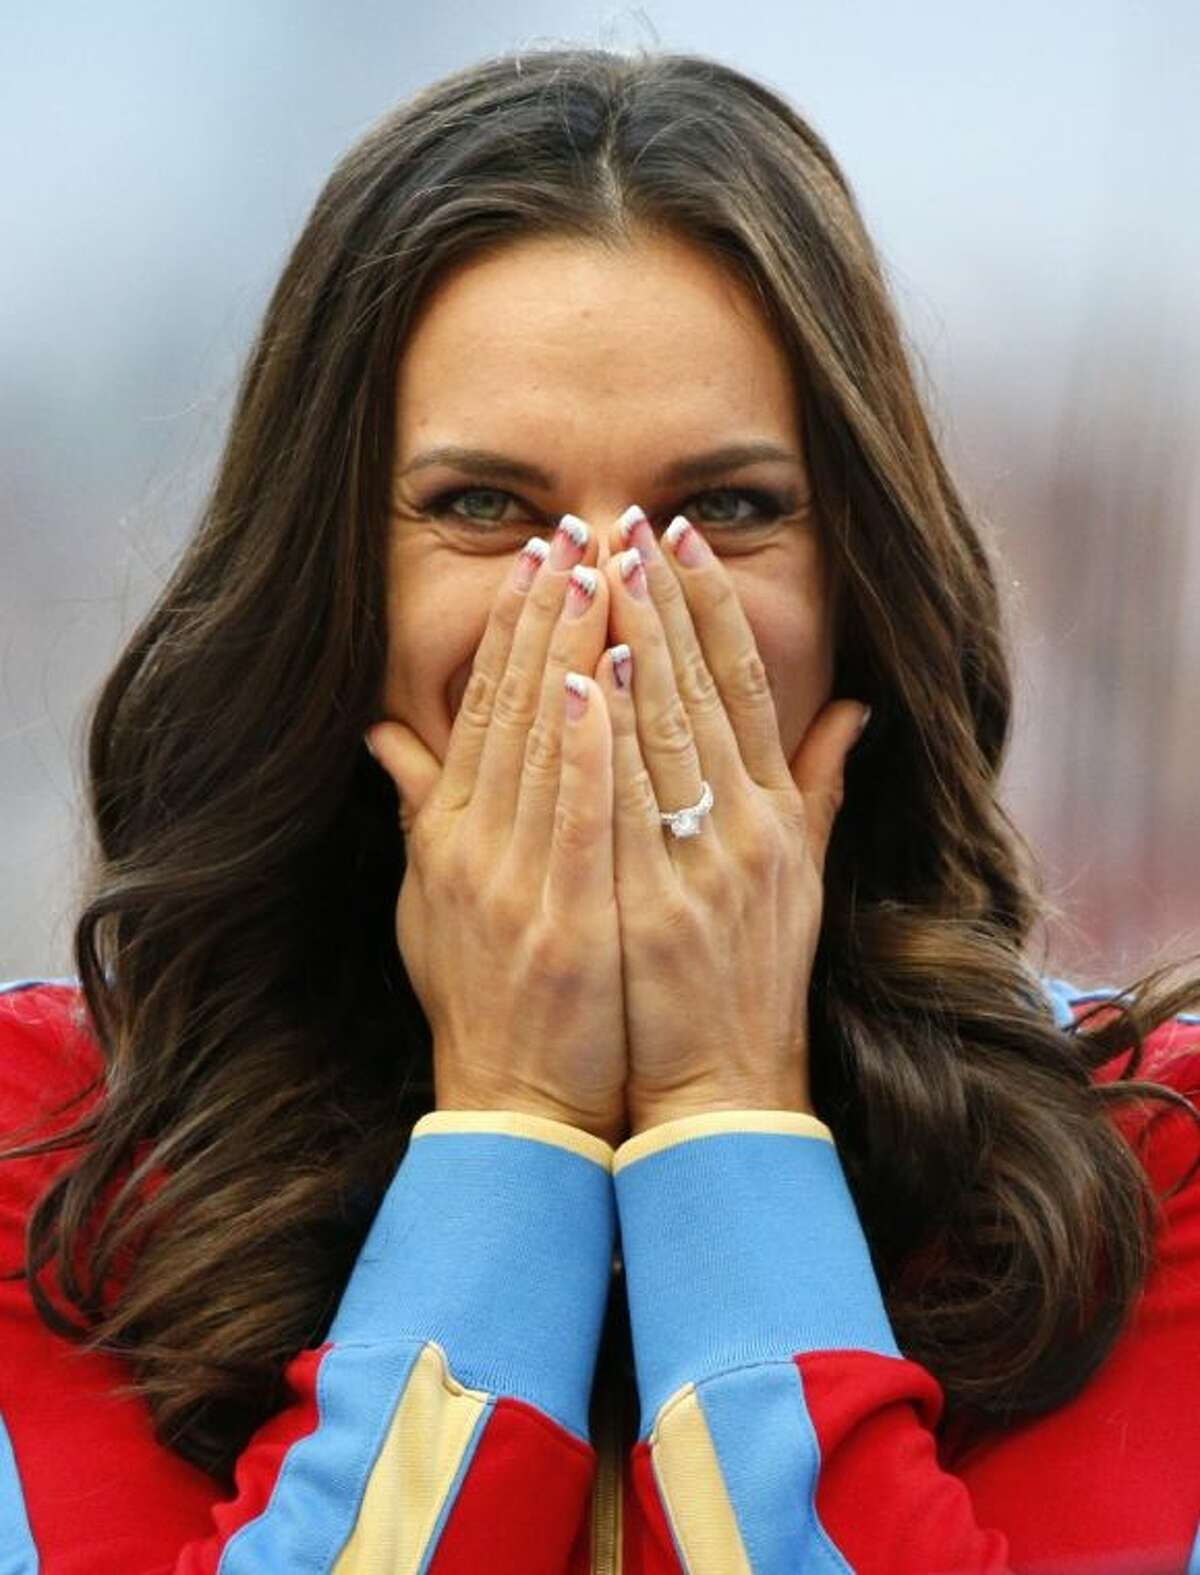 Russia’s Yelena Isinbayeva reacts as she stands on the podium after receiving the gold medal in the women’s pole vault on Thursday at the World Championships in Moscow.